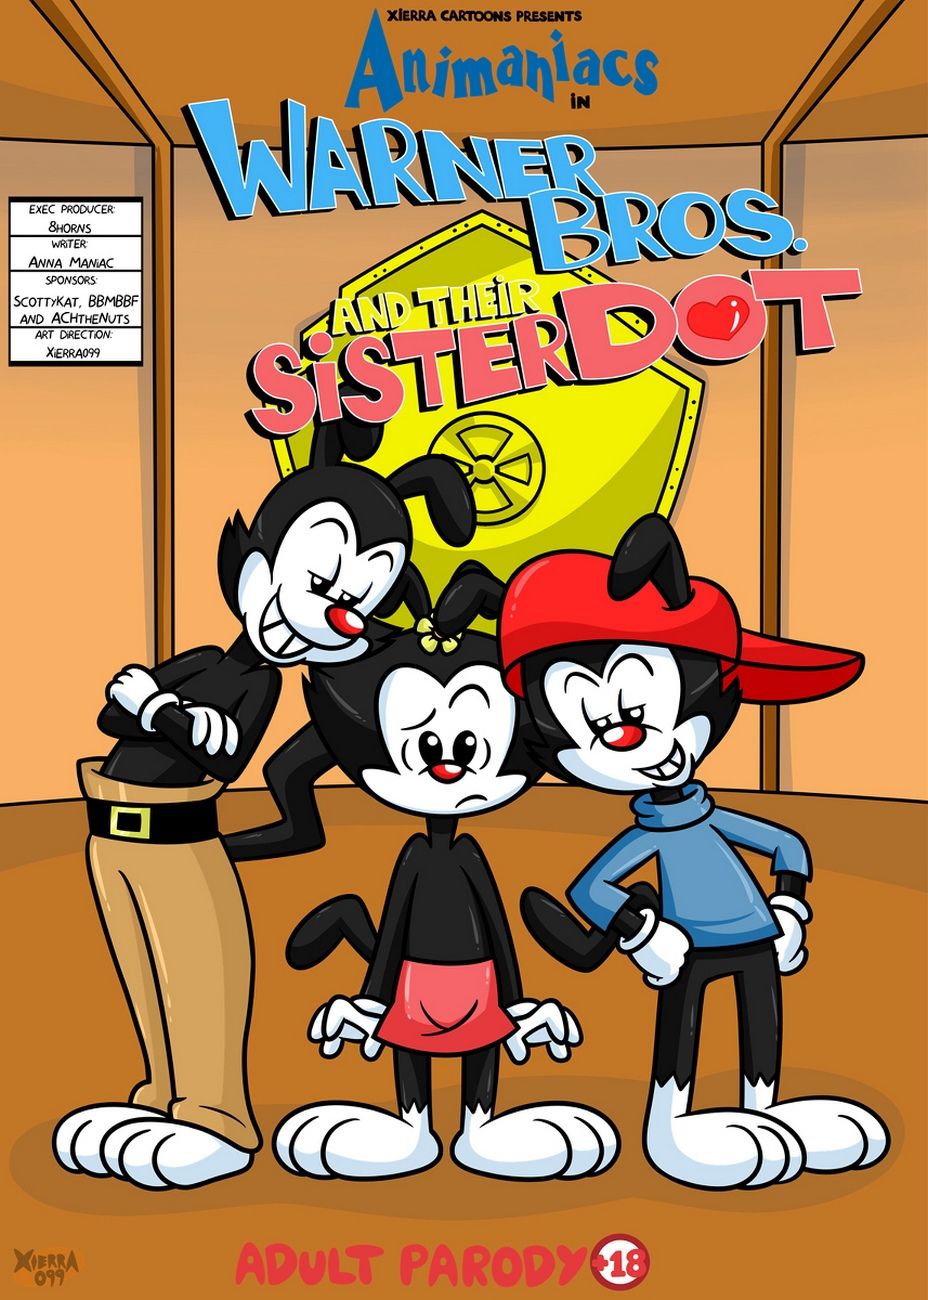 Warner Bros And Their Sister Dot page 1